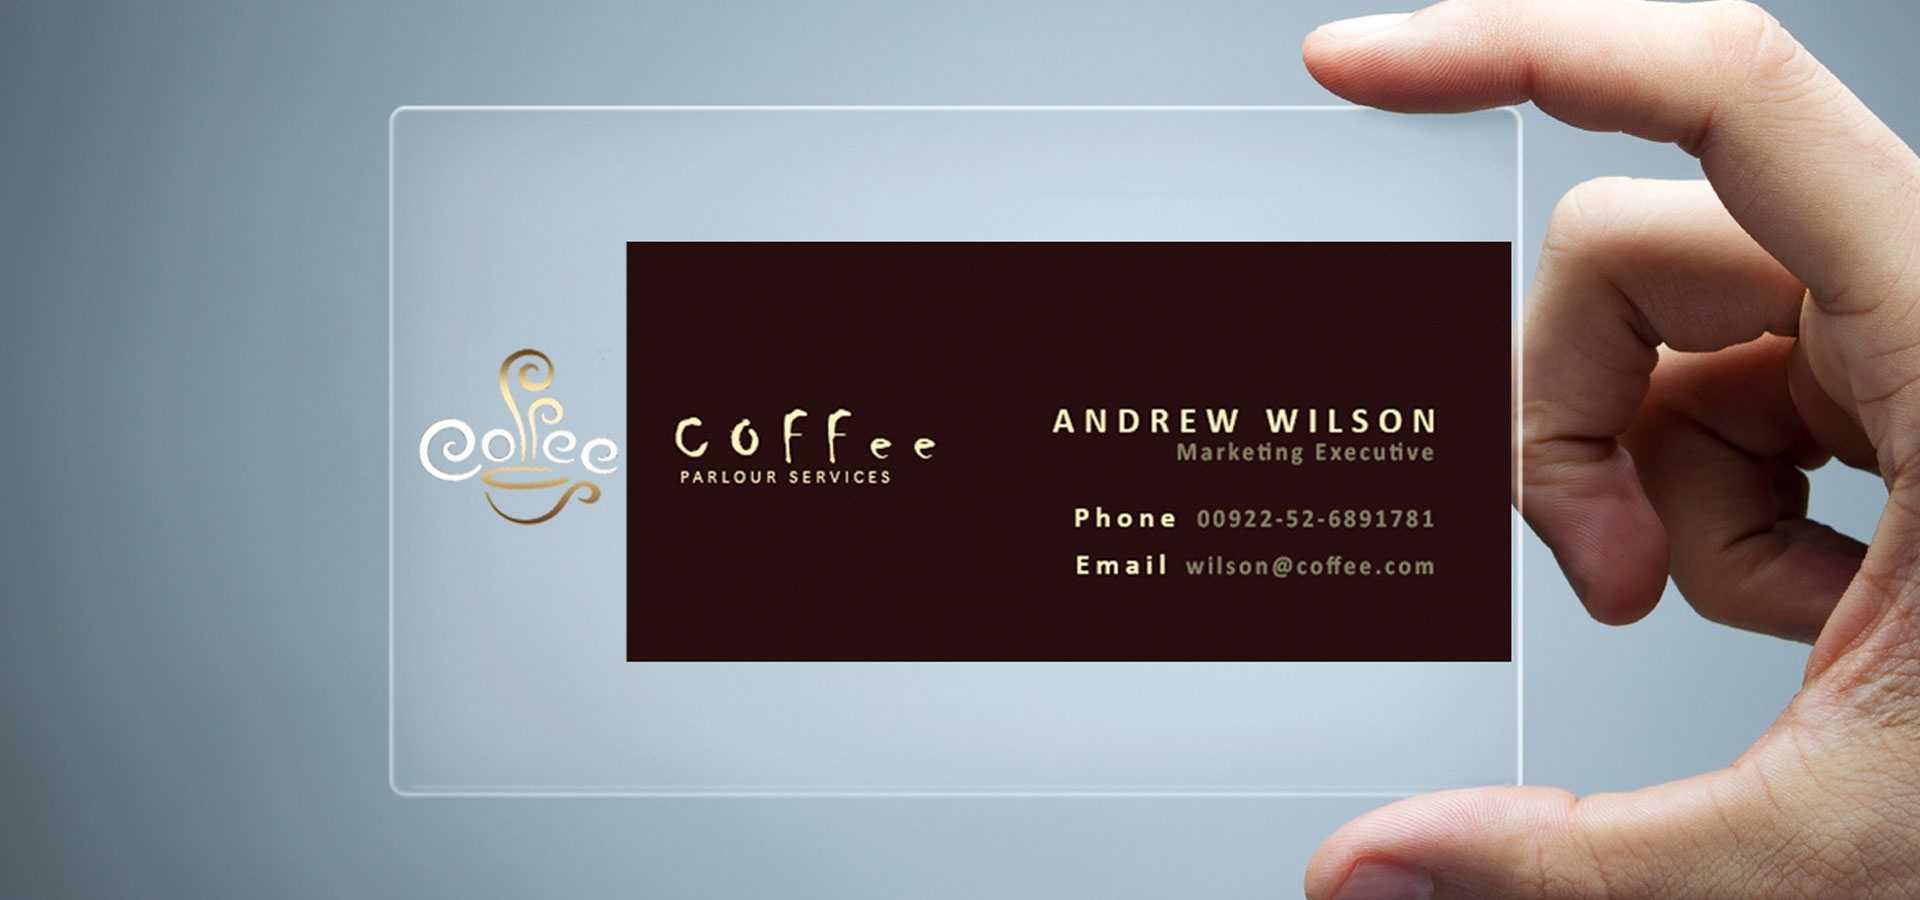 26+ Transparent Business Card Templates - Illustrator, Ms With Regard To Microsoft Templates For Business Cards